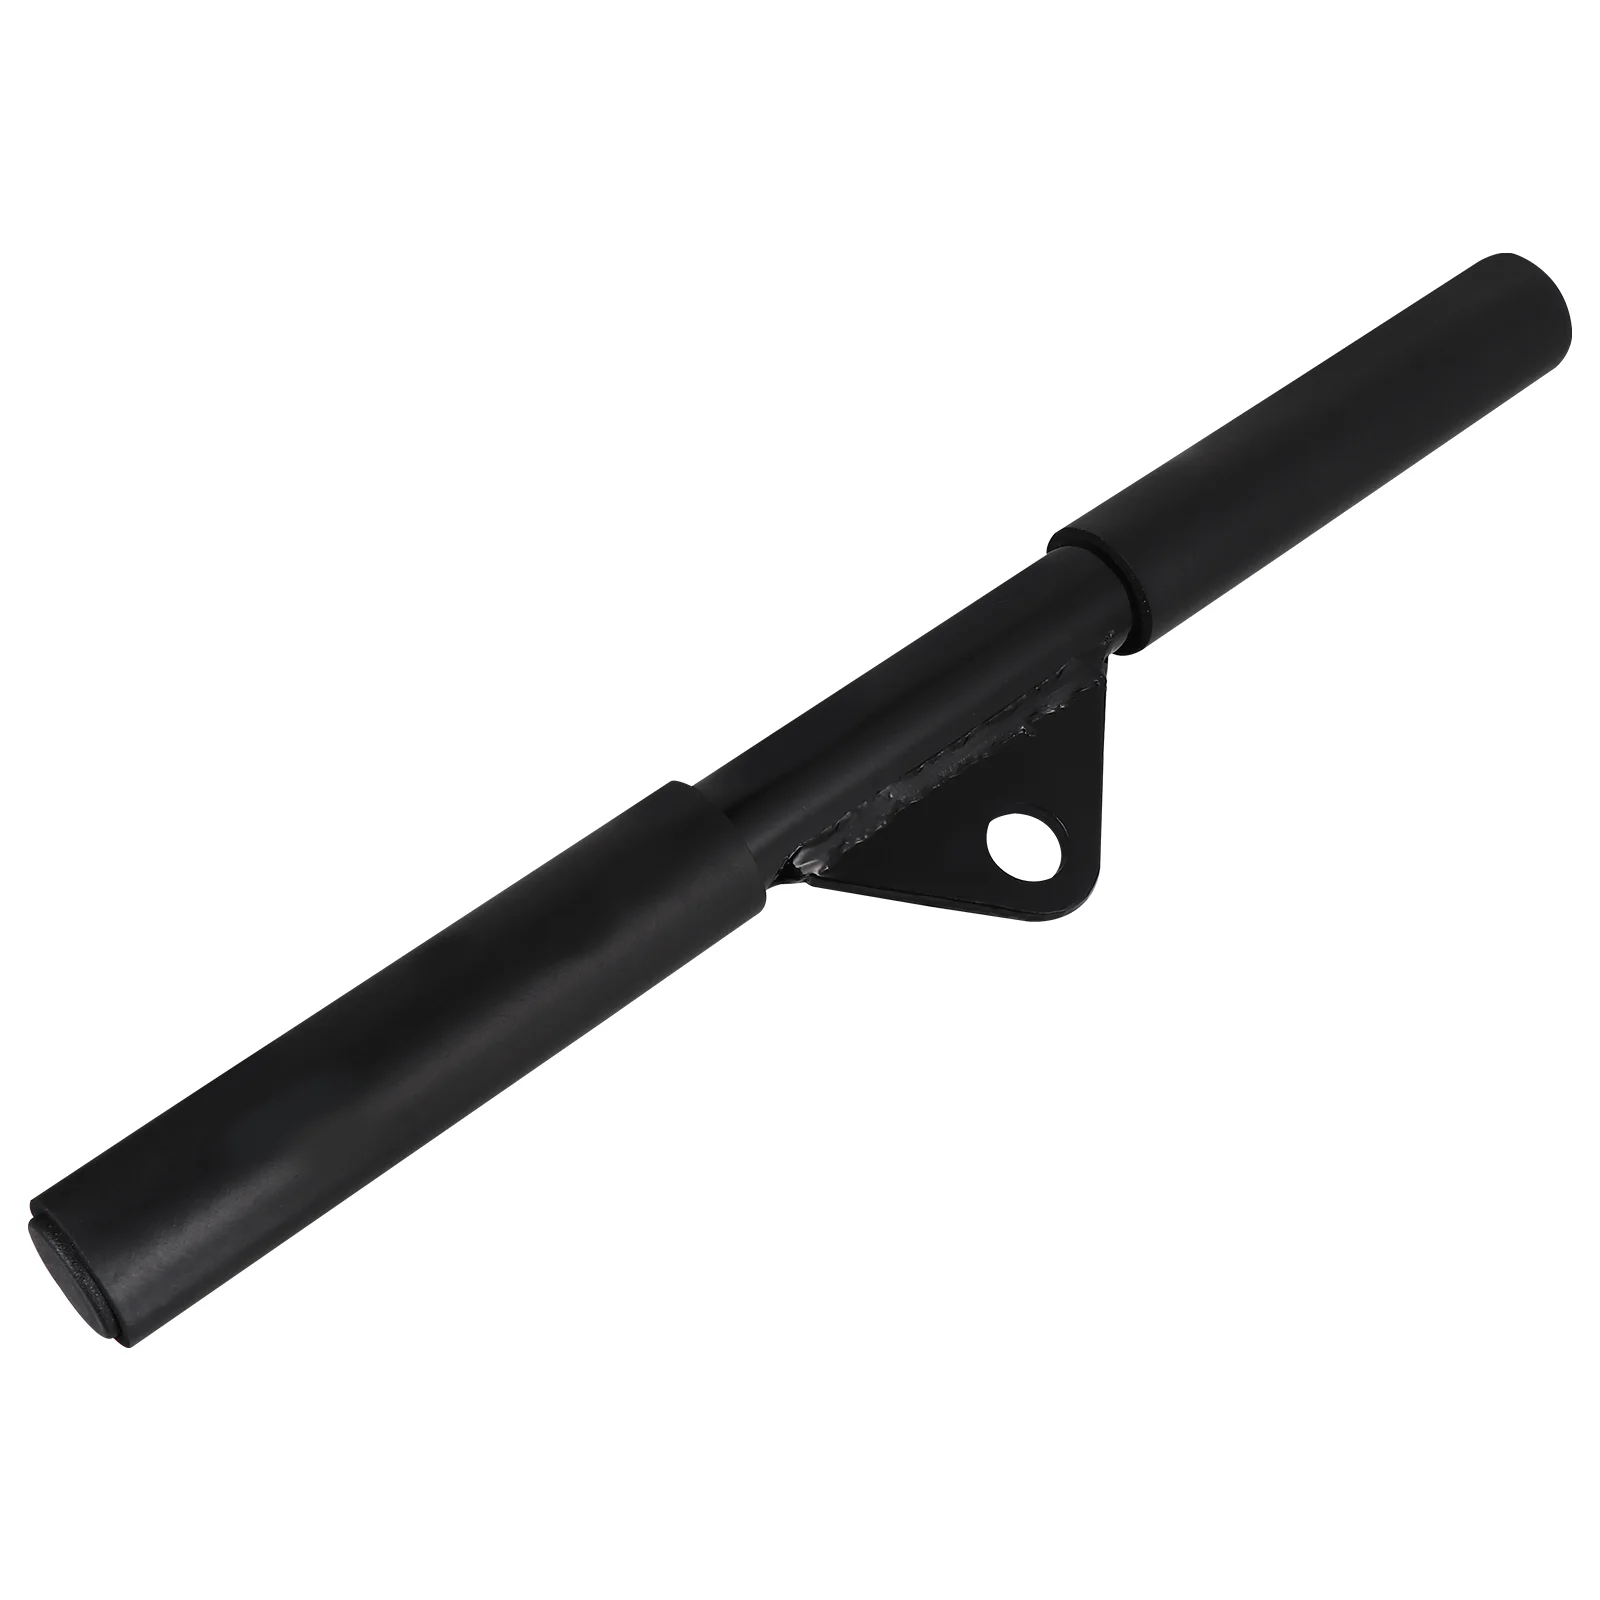 

Steel Tension Rod Tension Bar Practical Tension Lever Strength Training Tool Barbell for sports